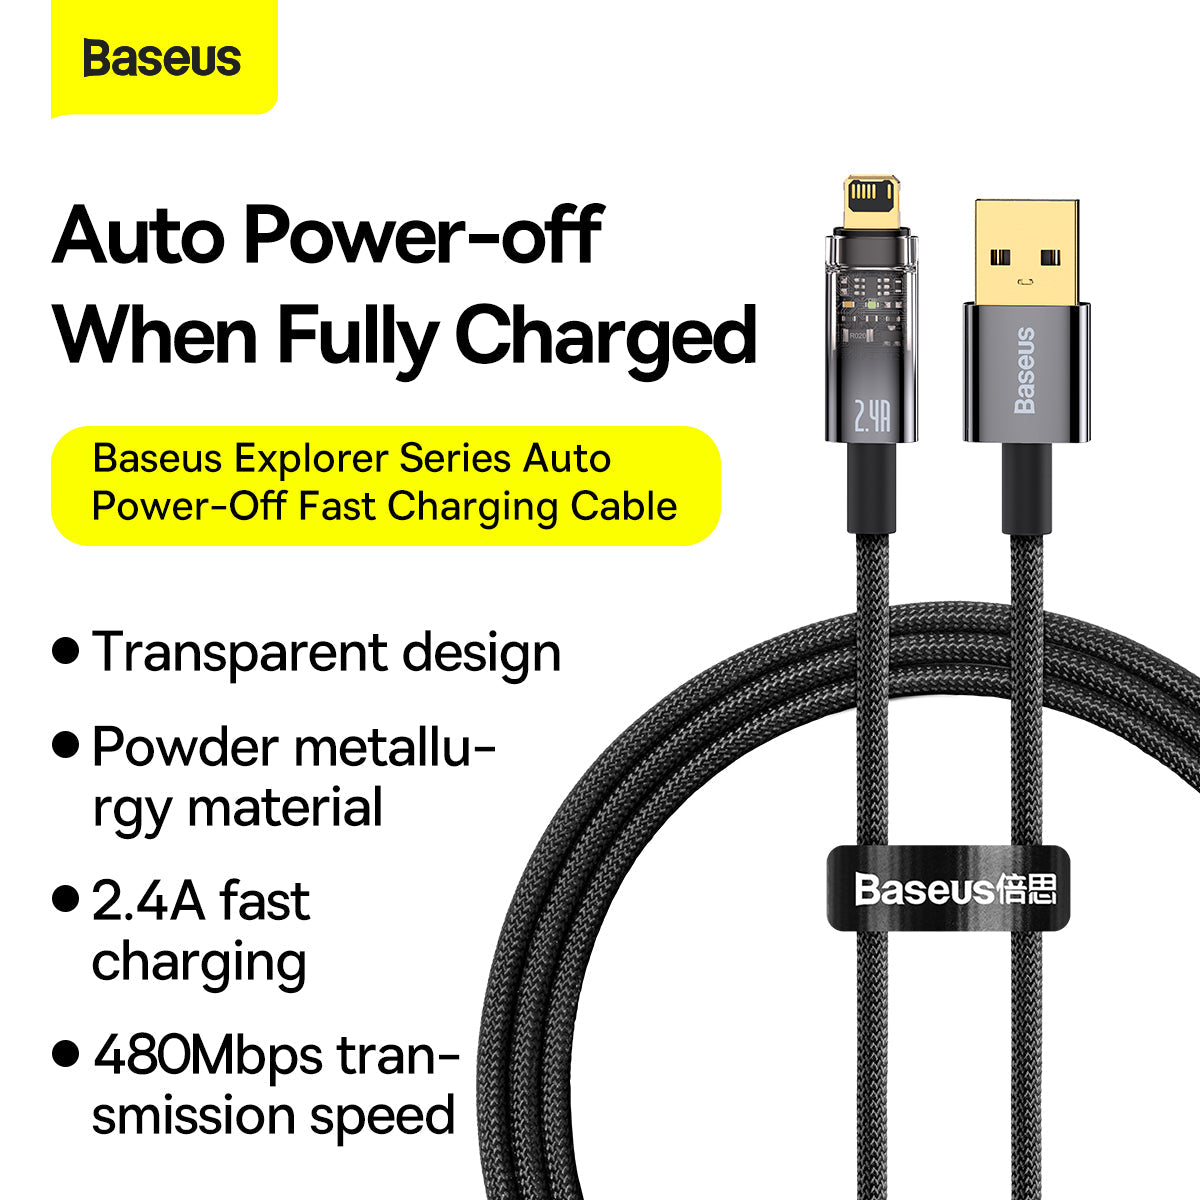 BASEUS EXPLORER SERIES AUTO POWER-OFF FAST CHARGING DATA CABLE USB TO IPH (2.4A)(1M) - Black